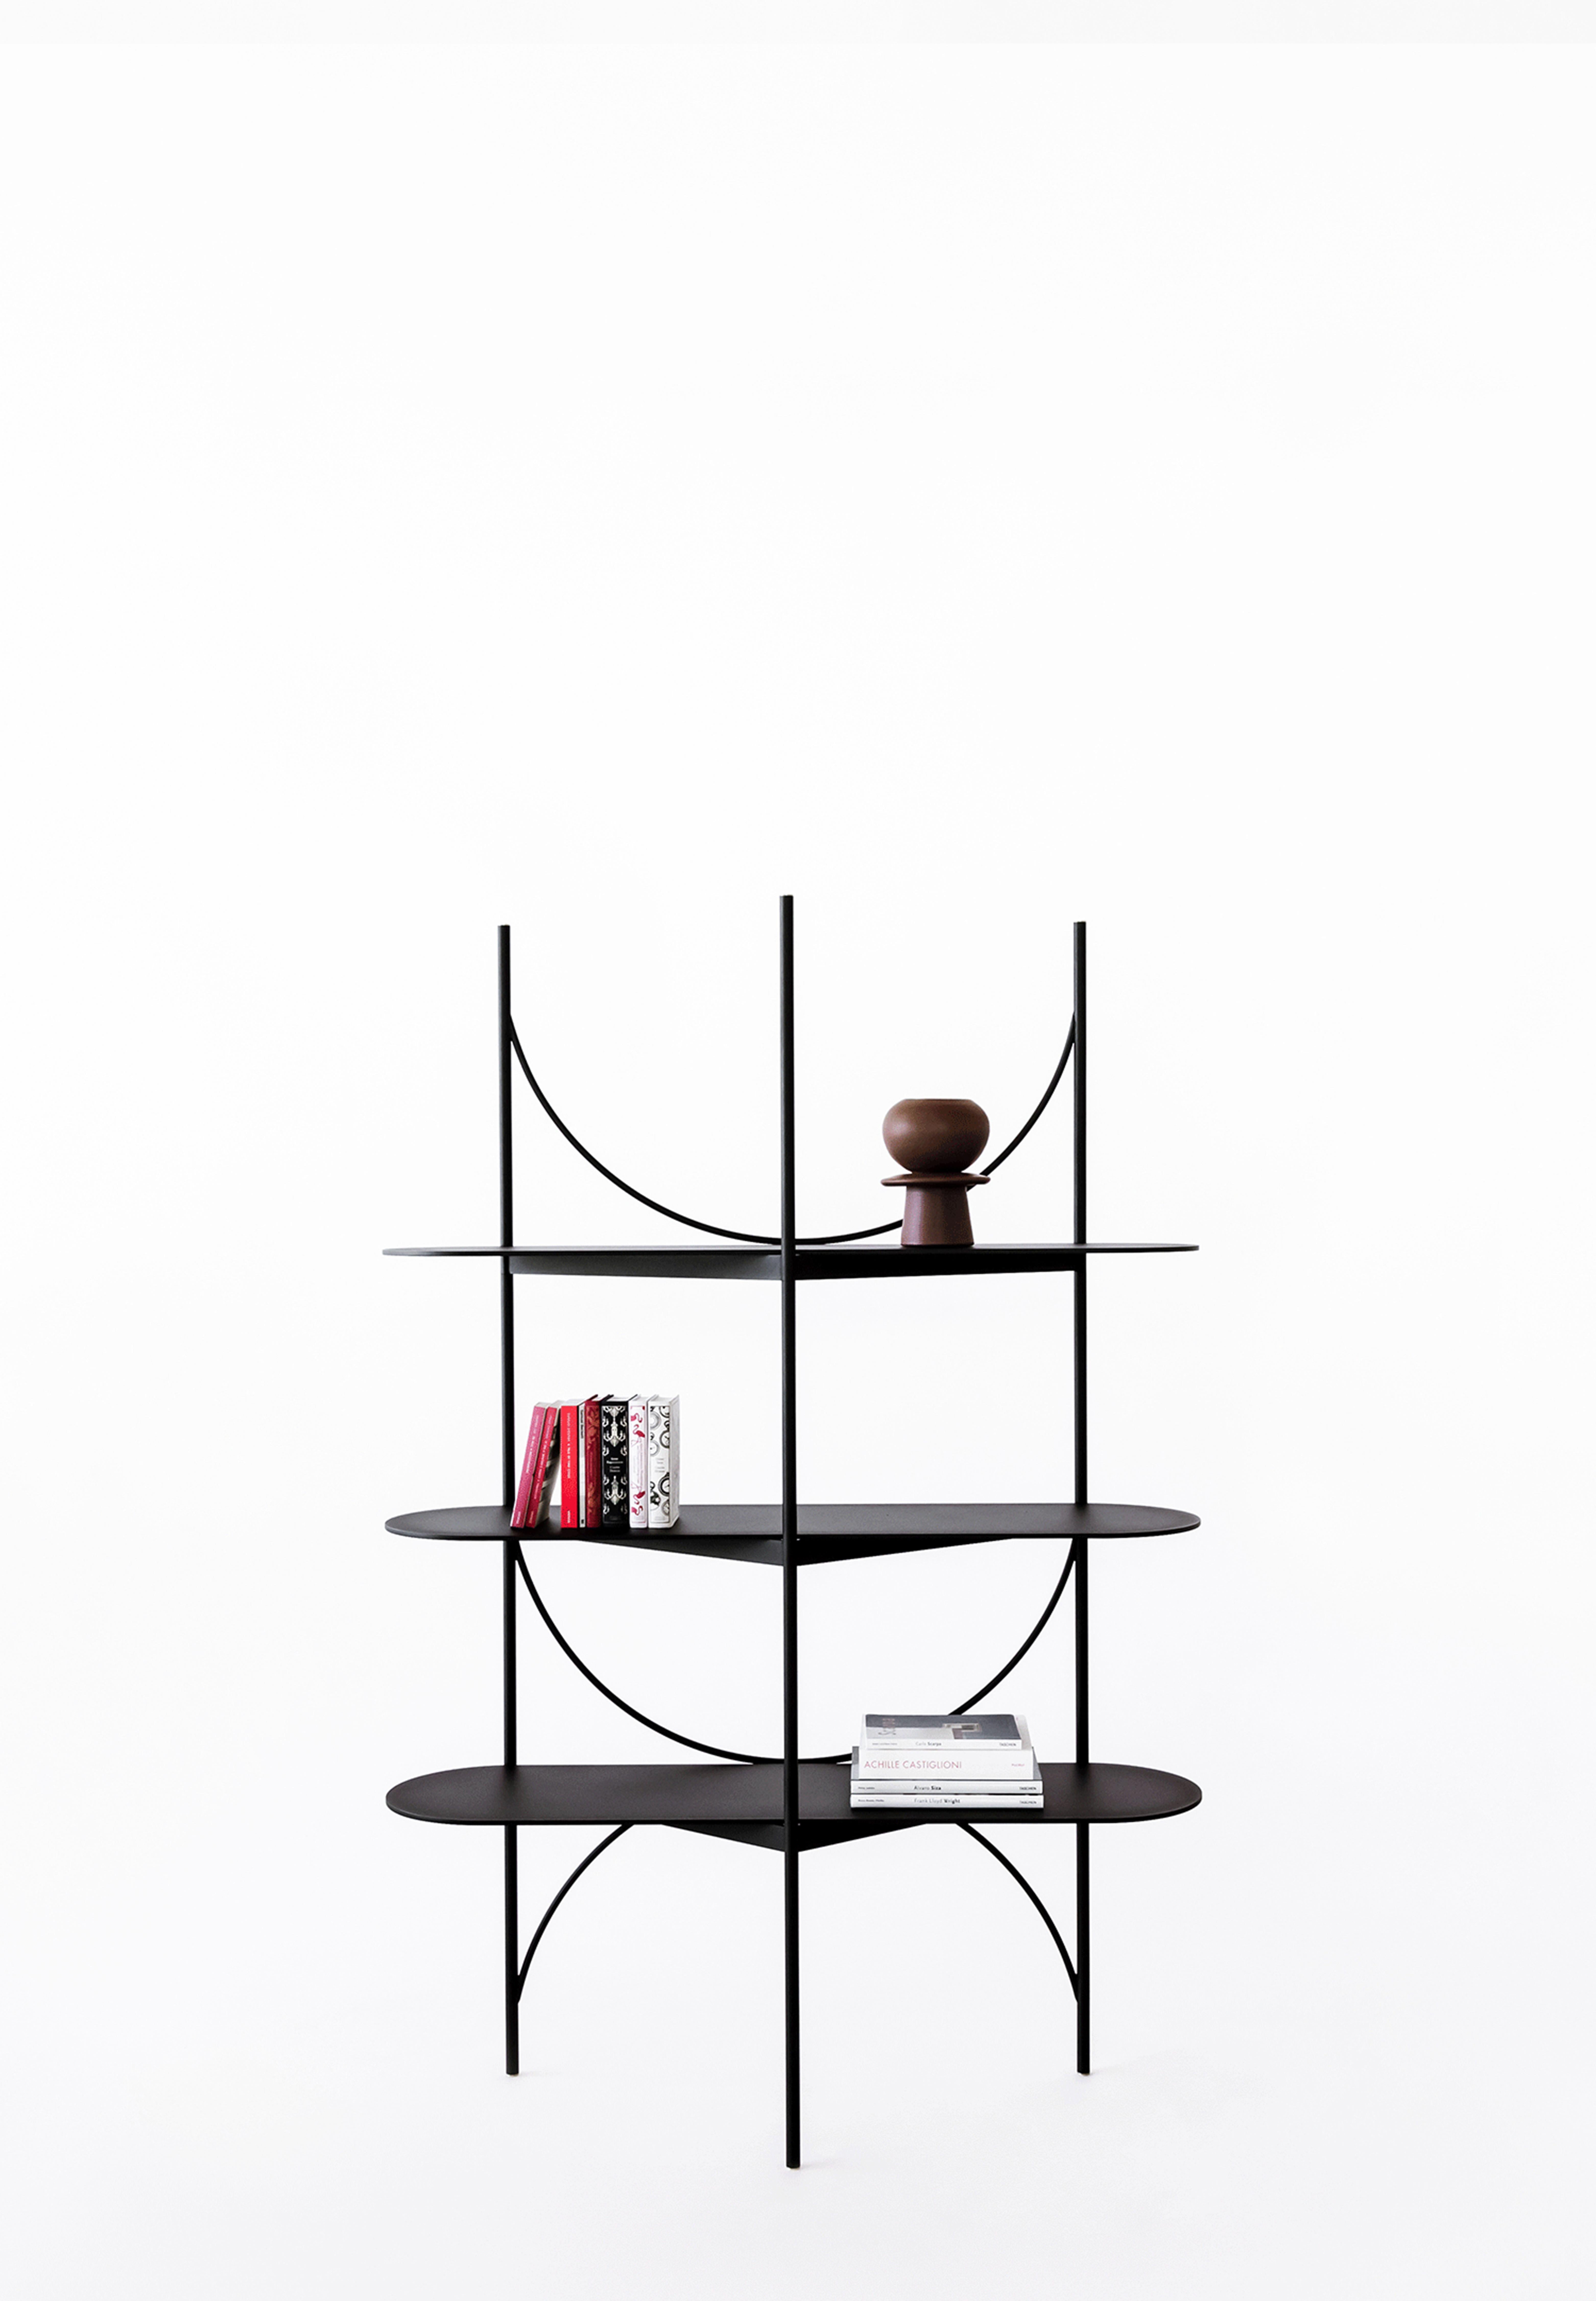 Small moored shelving by Rosanna Ceravolo
Dimensions: W 140 x D 42 x H 200 cm
Materials: Powdercoated metal with brass detailing.
Also available in different dimensions and colors.


Rosanna Ceravolo is a Melbourne based architect whose multi